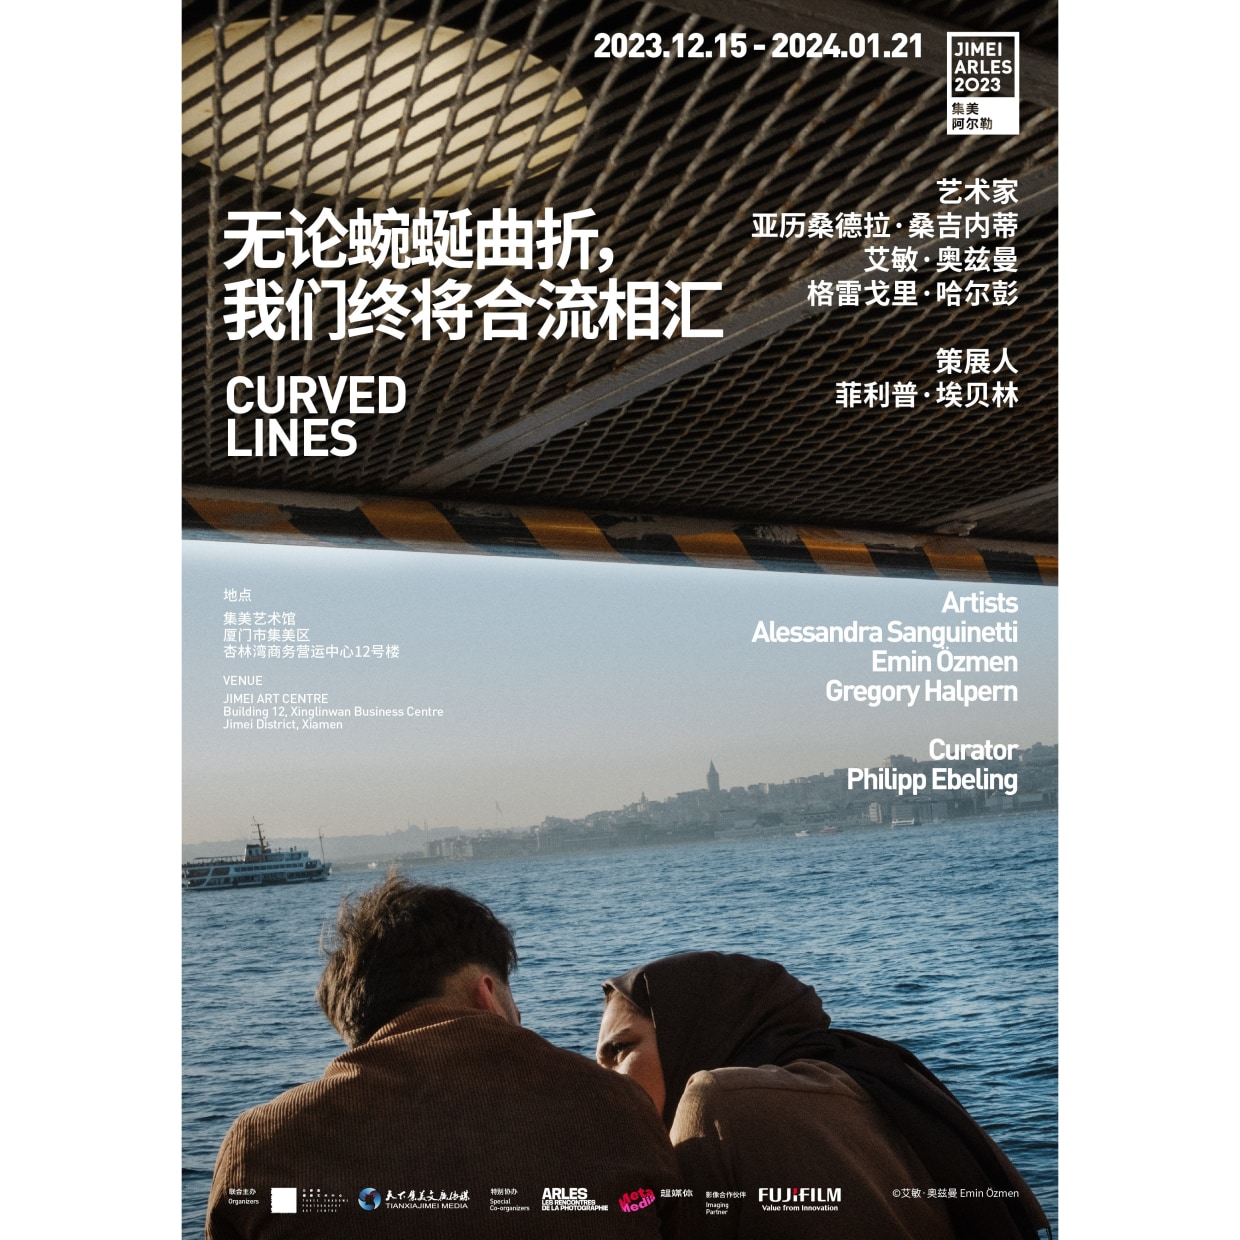 Curved Lines “Curved Lines” brings together three photographers from Magnum Photos. The inspiration for the title stems from a simple...